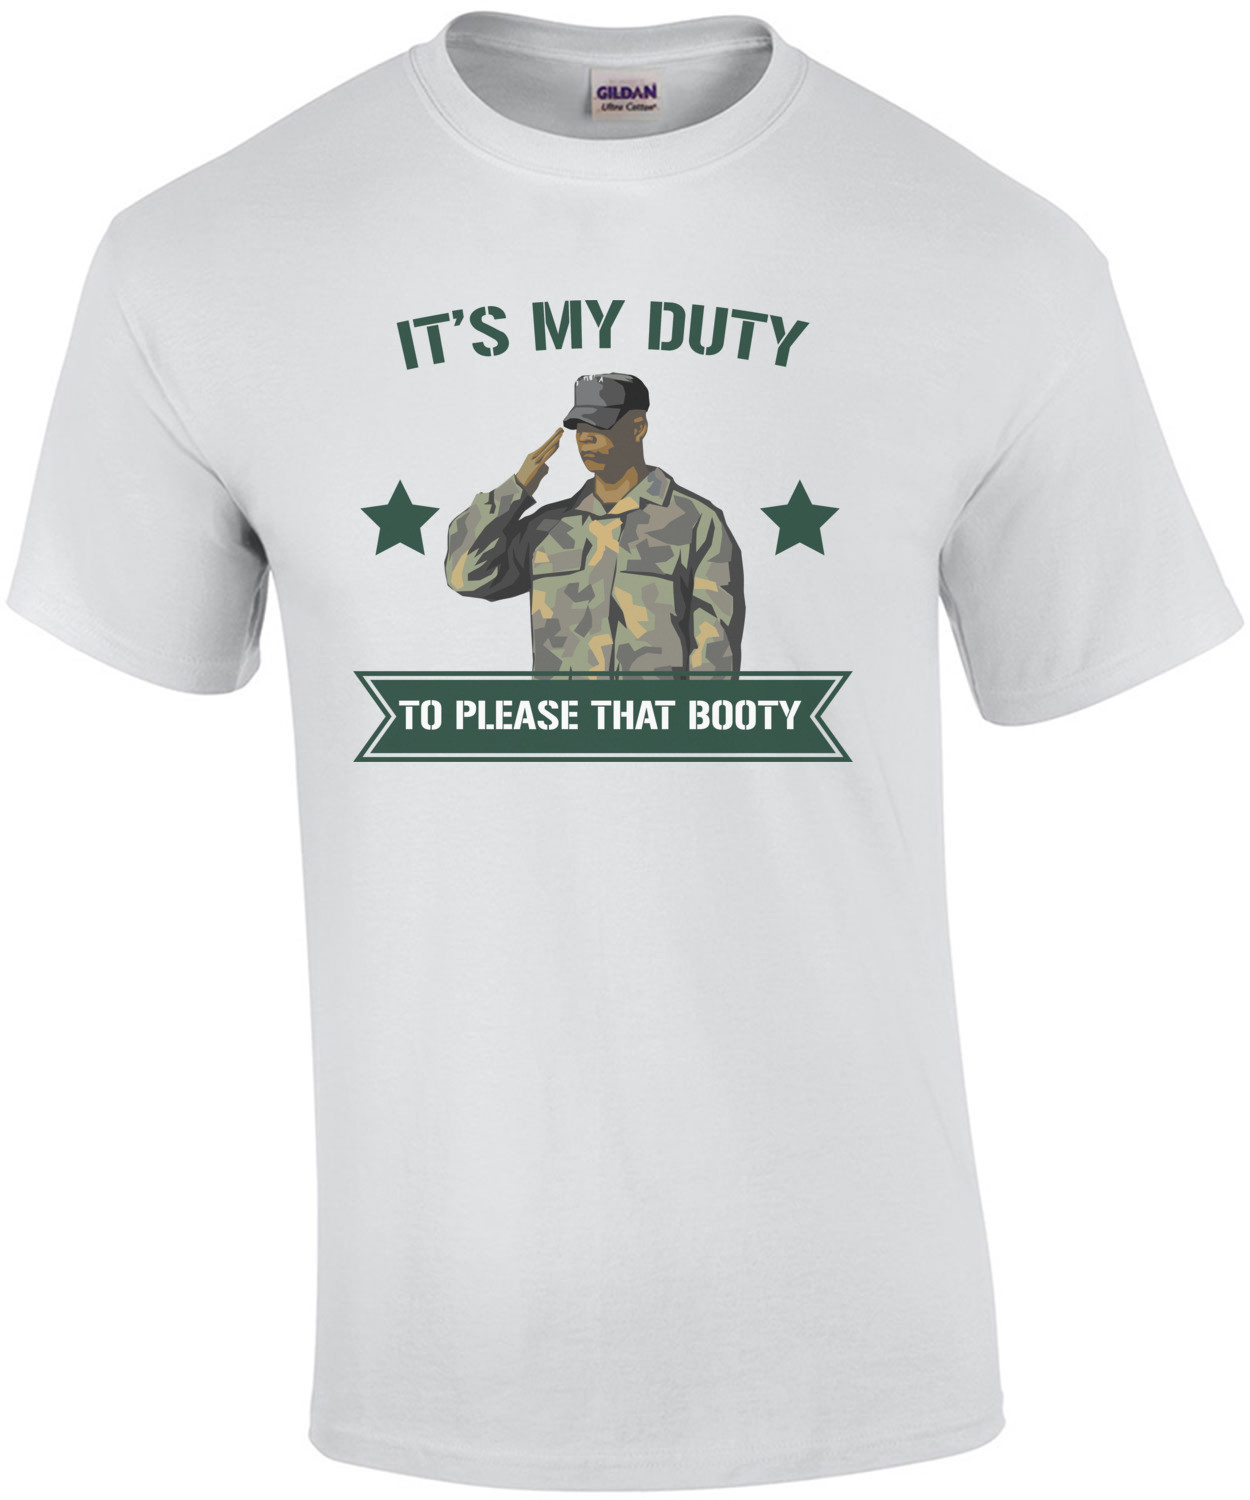 It's my duty to please that booty T-Shirt